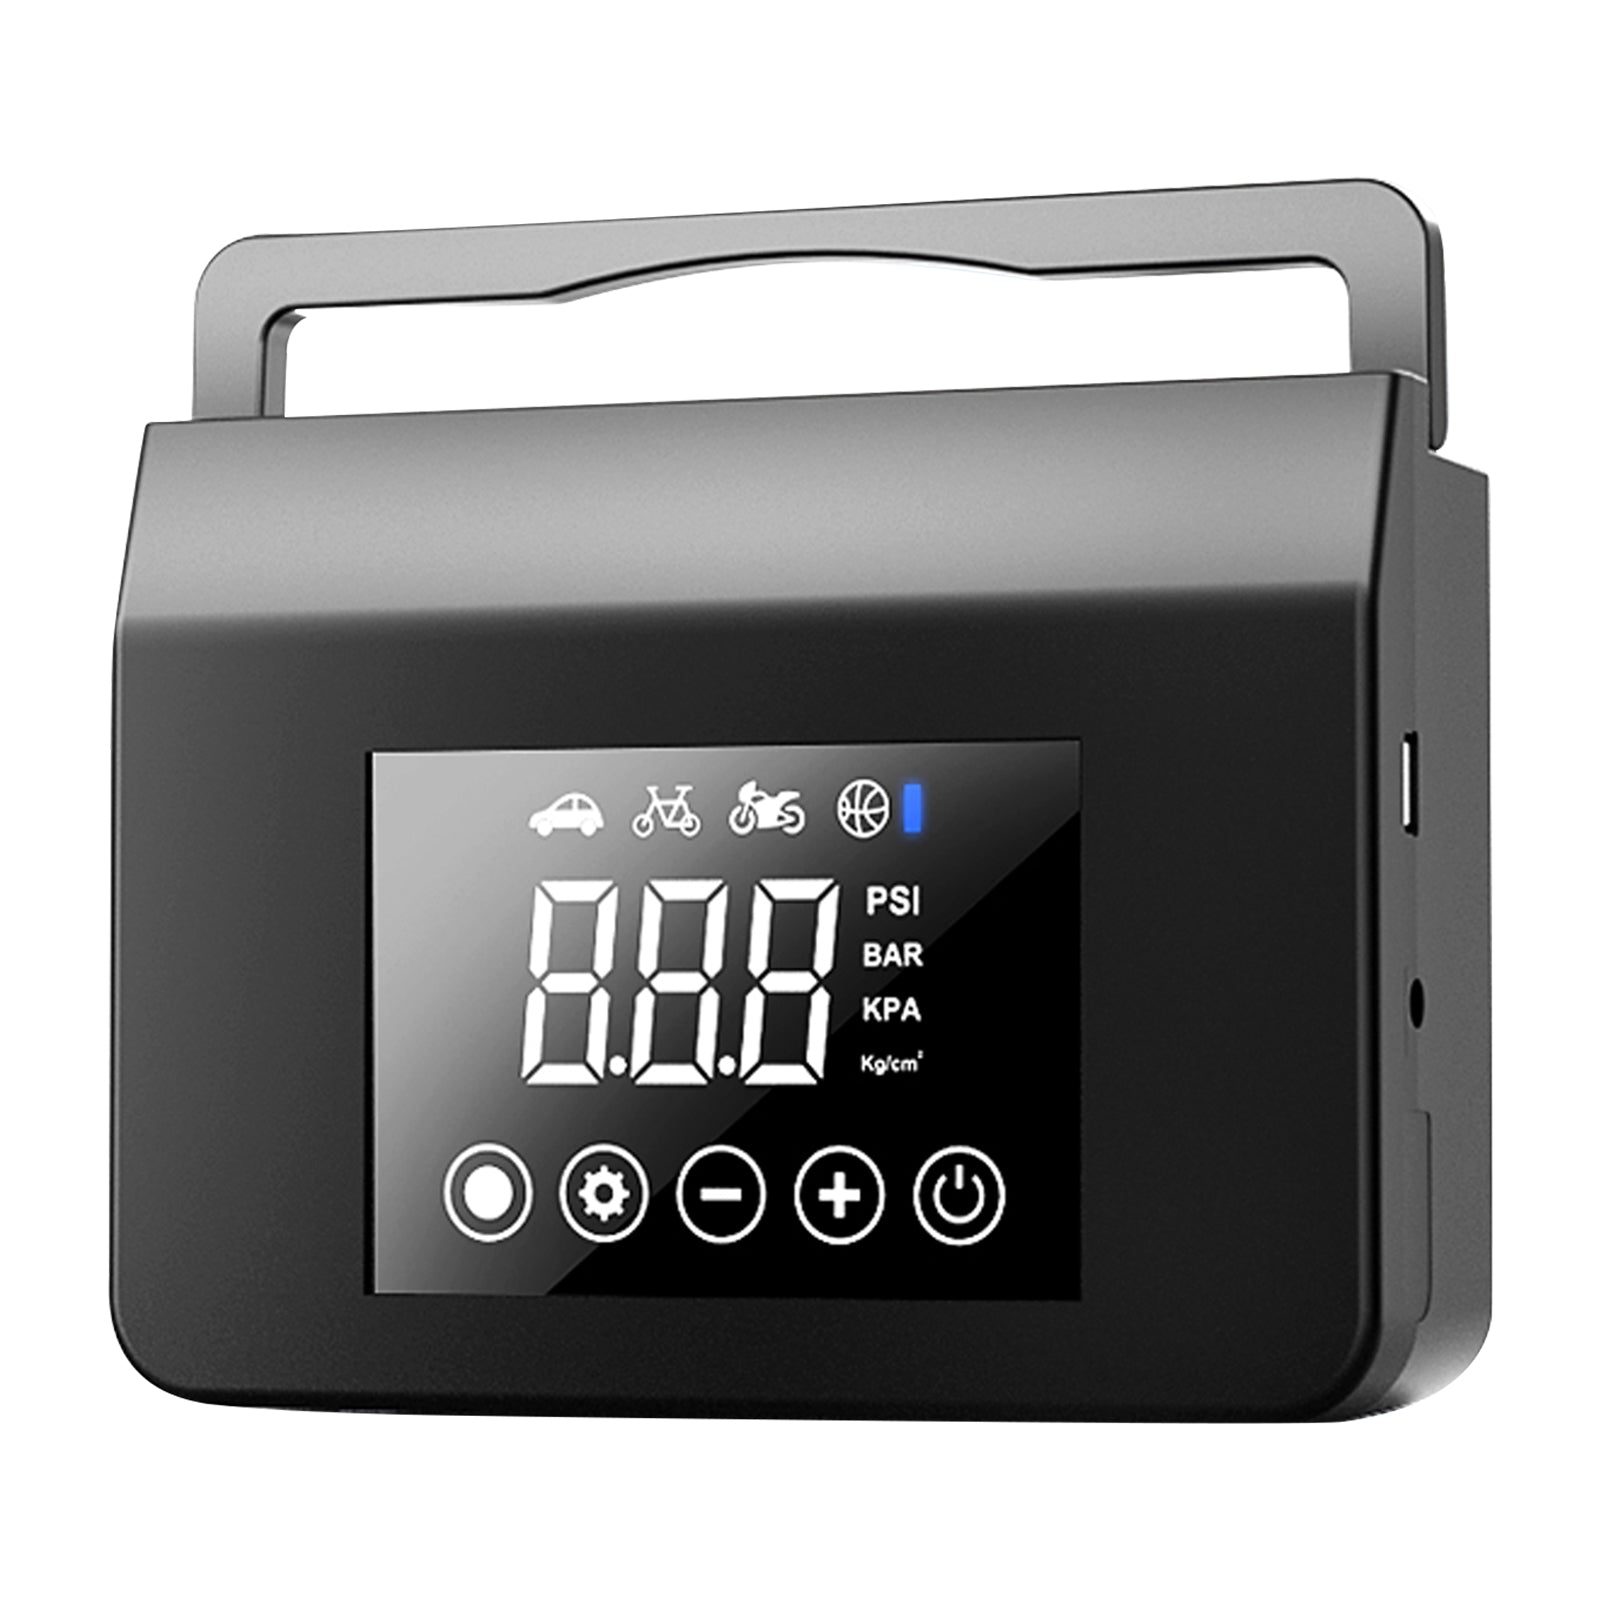 Electric Ball Pump, Smart Air Pump Portable Fast Ball Inflation with  Precise Pressure Gauge Digital LCD Display and 4+N Preset Modes for Car  Exercise